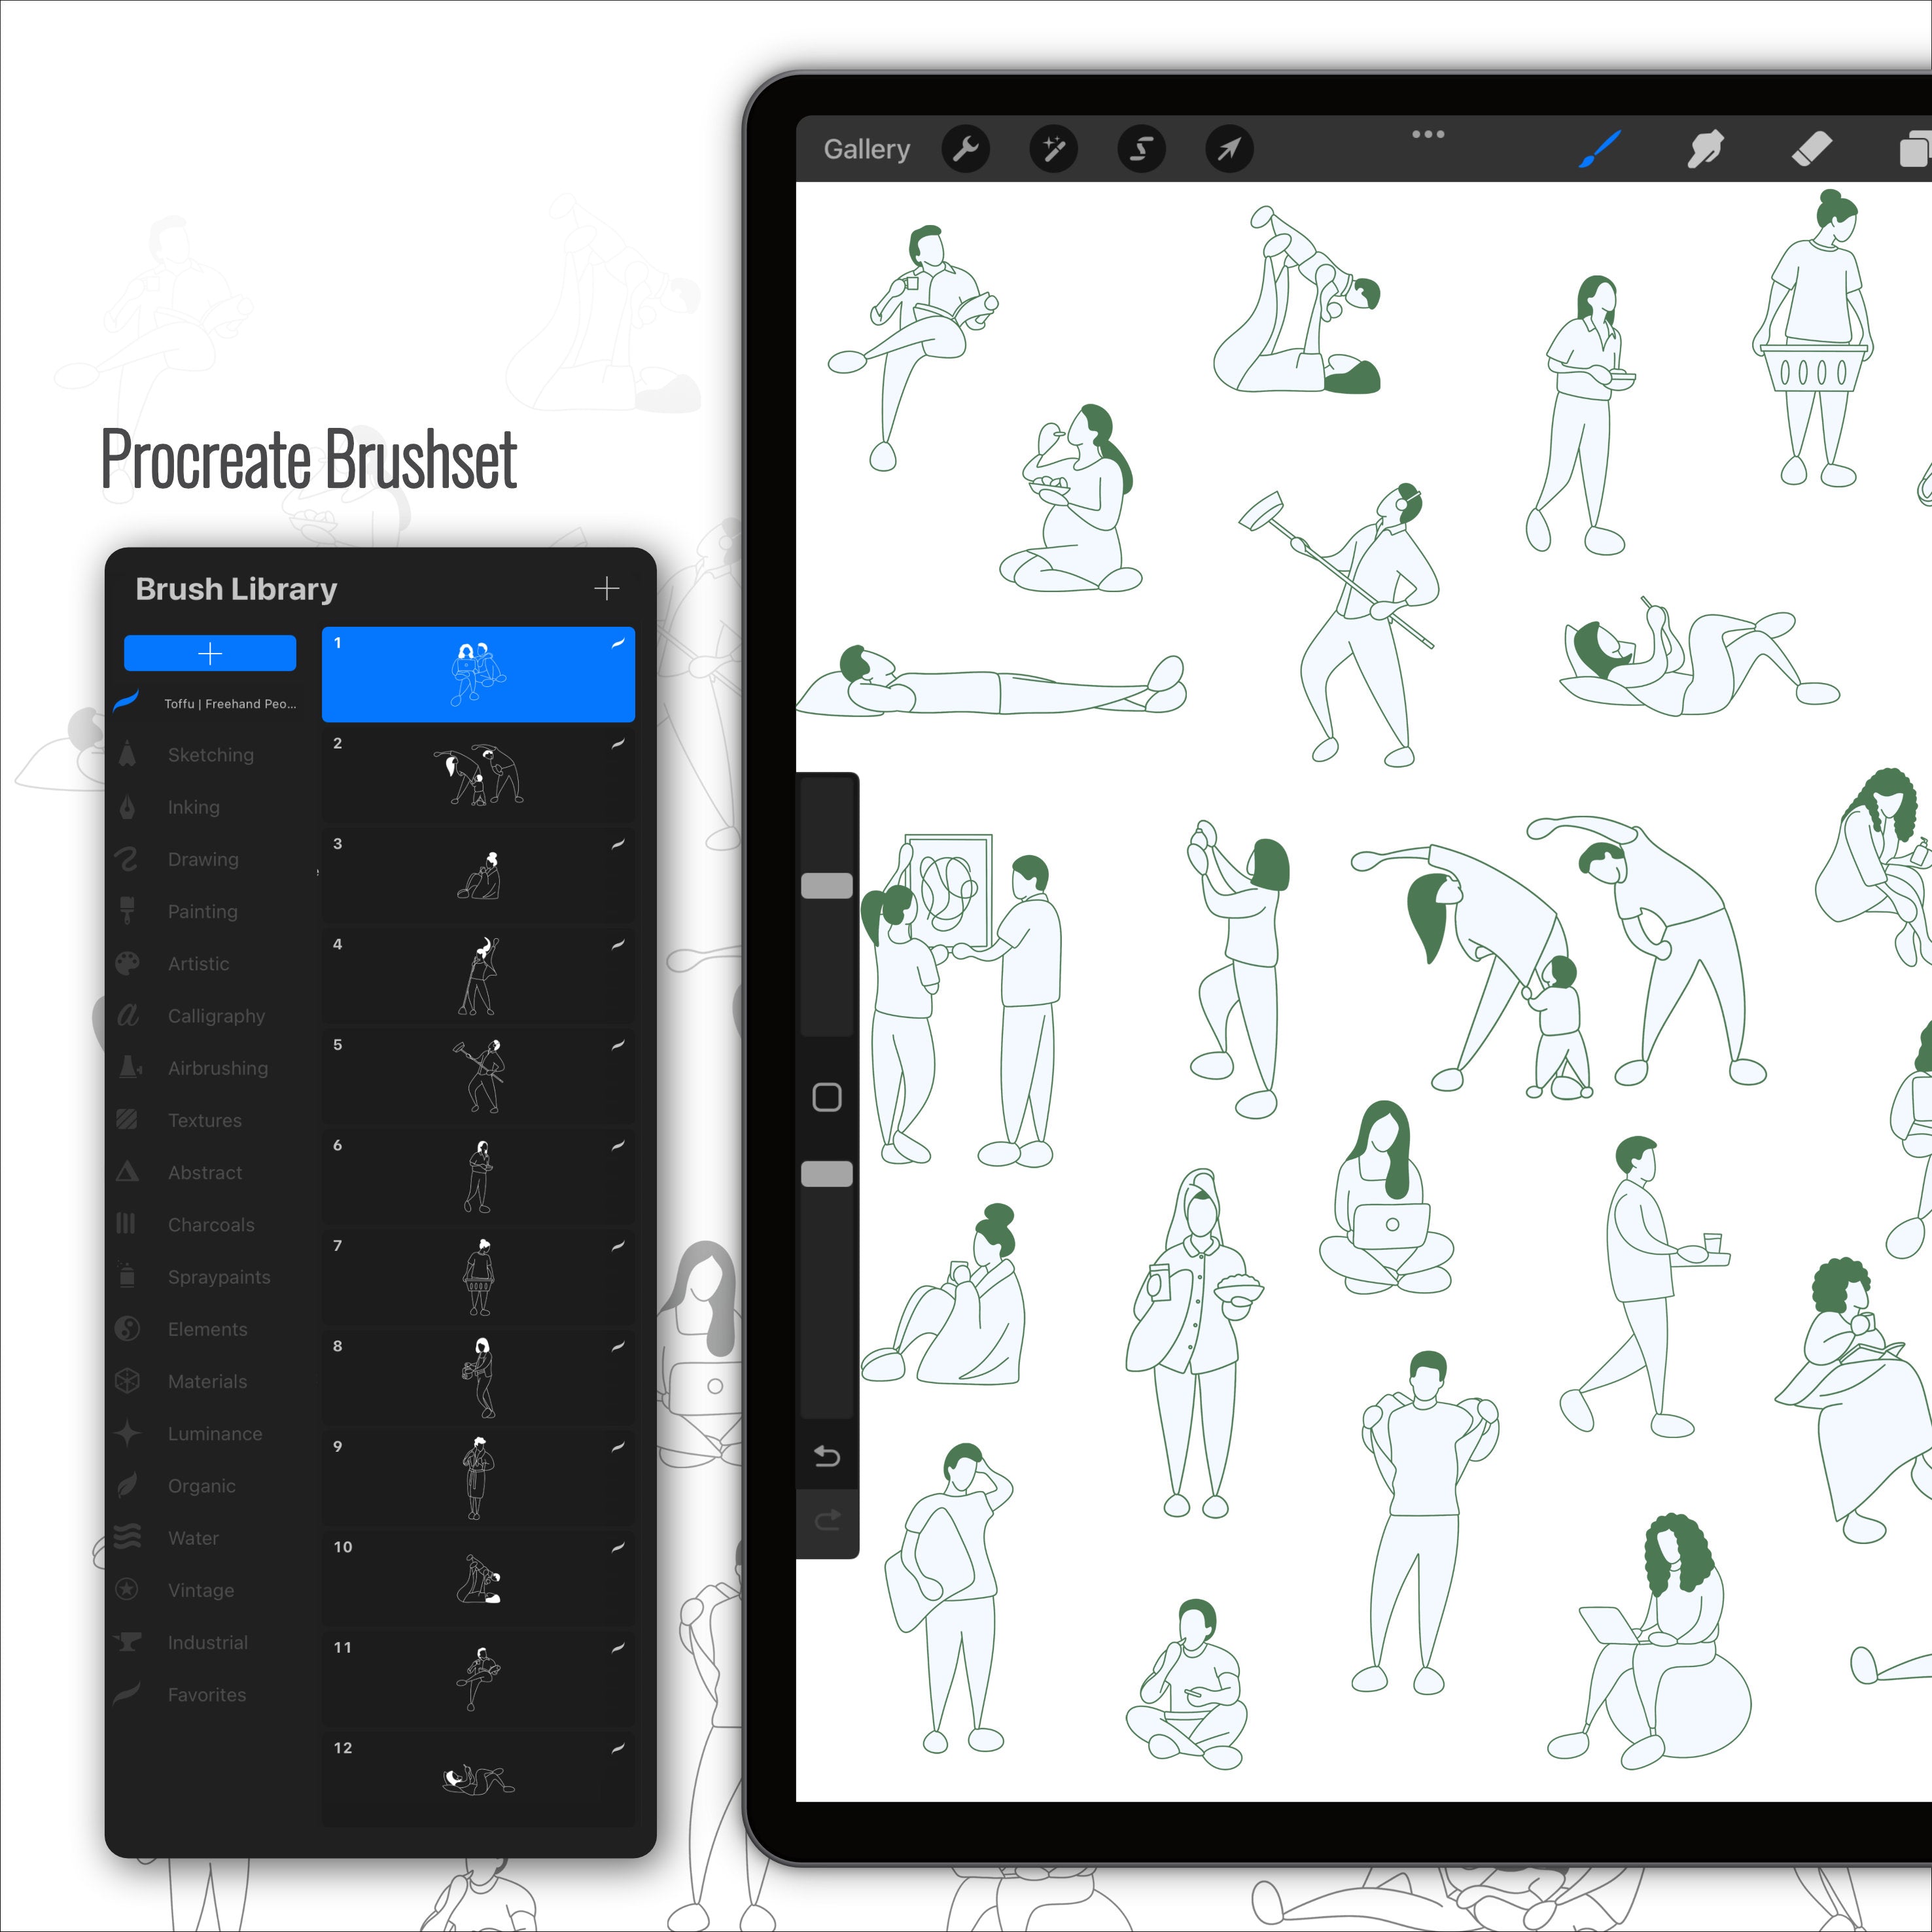 Procreate Freehand Indoor People Brushset & Illustrations PNG - Toffu Co